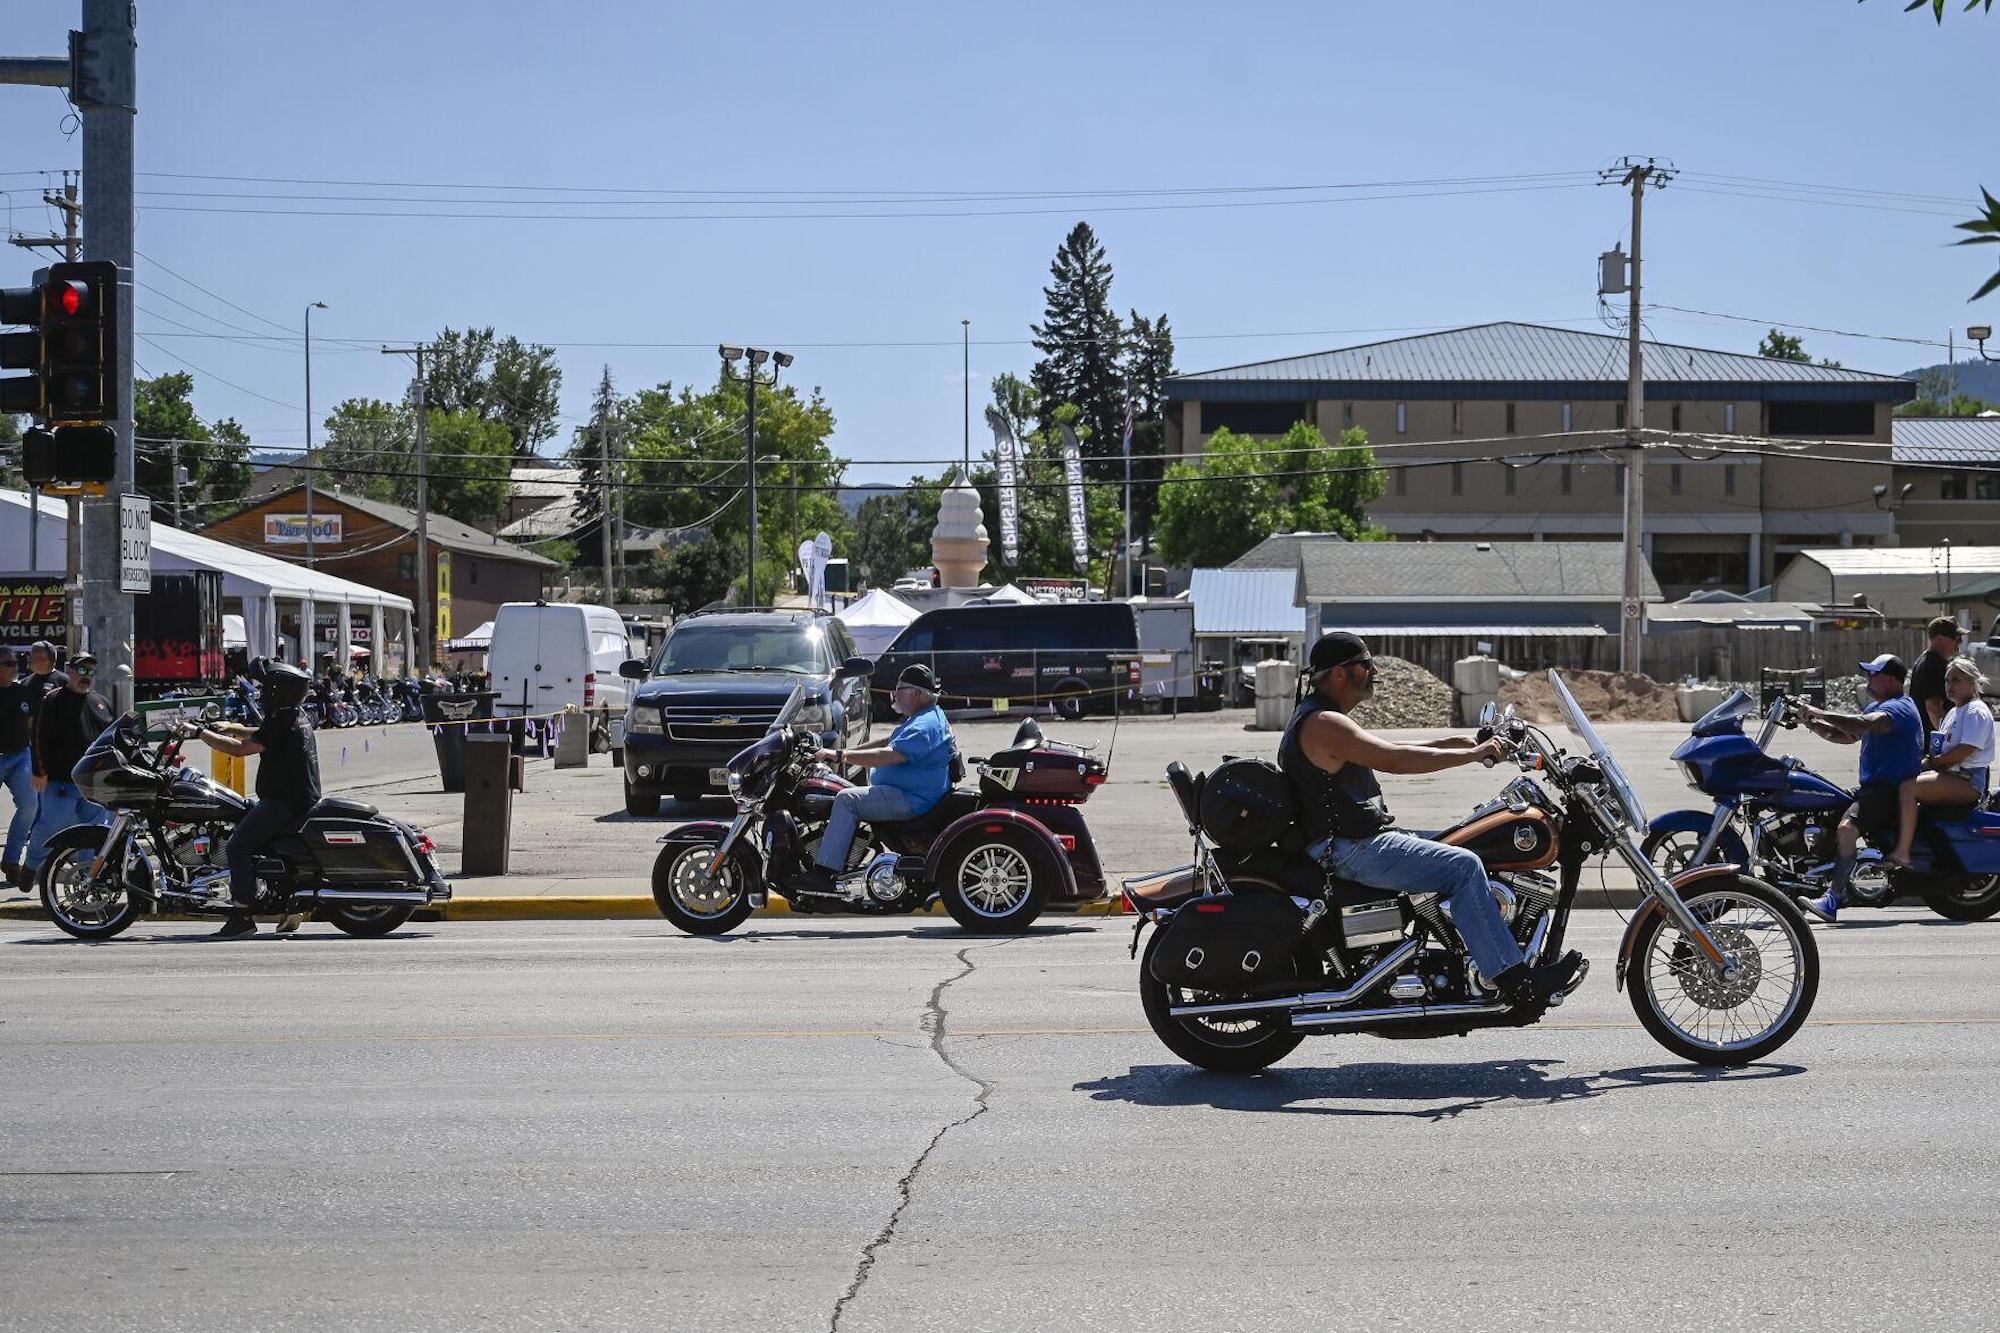 The 2022 Sturgis Motorcycle Rally in full force! Media sourced from the Rapid City Journal, via photographer Matt Gade.